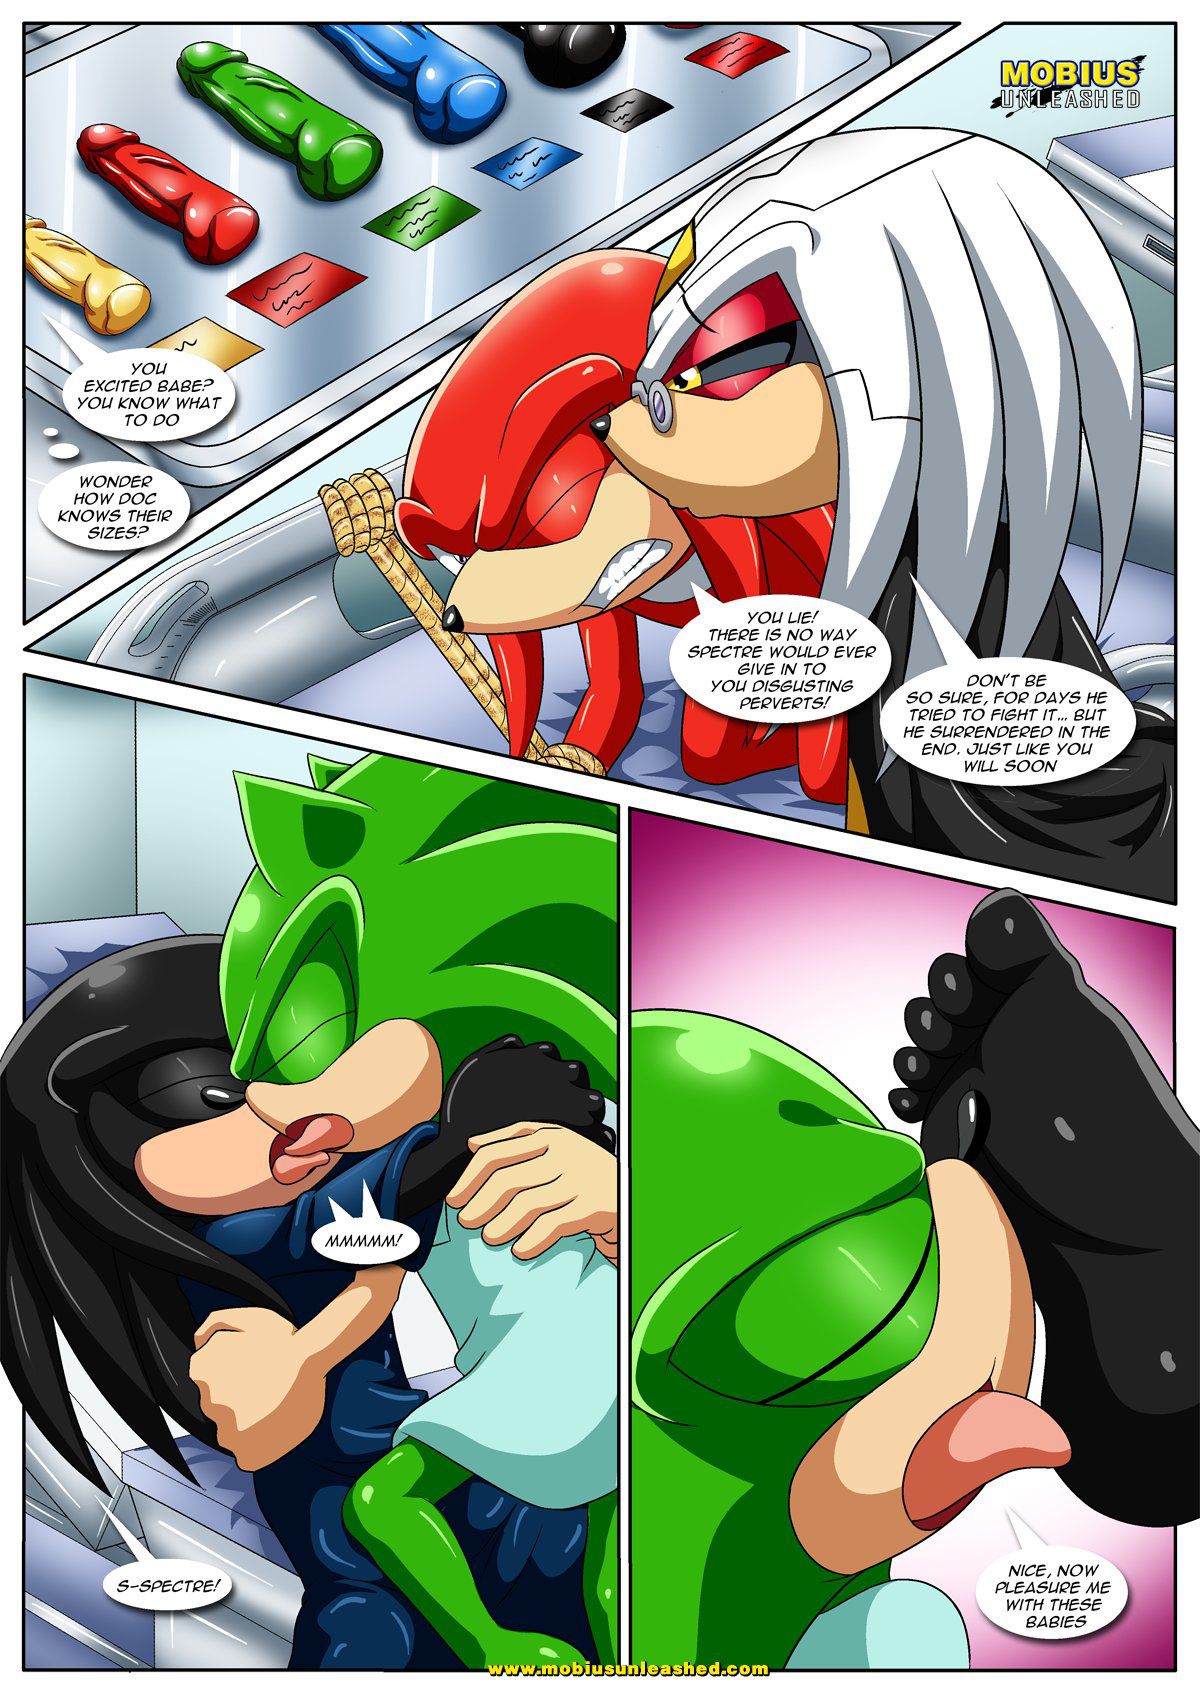 [Palcomix] The Doctor Will See You Now 2 (Sonic The Hedgehog) [Ongoing] 3